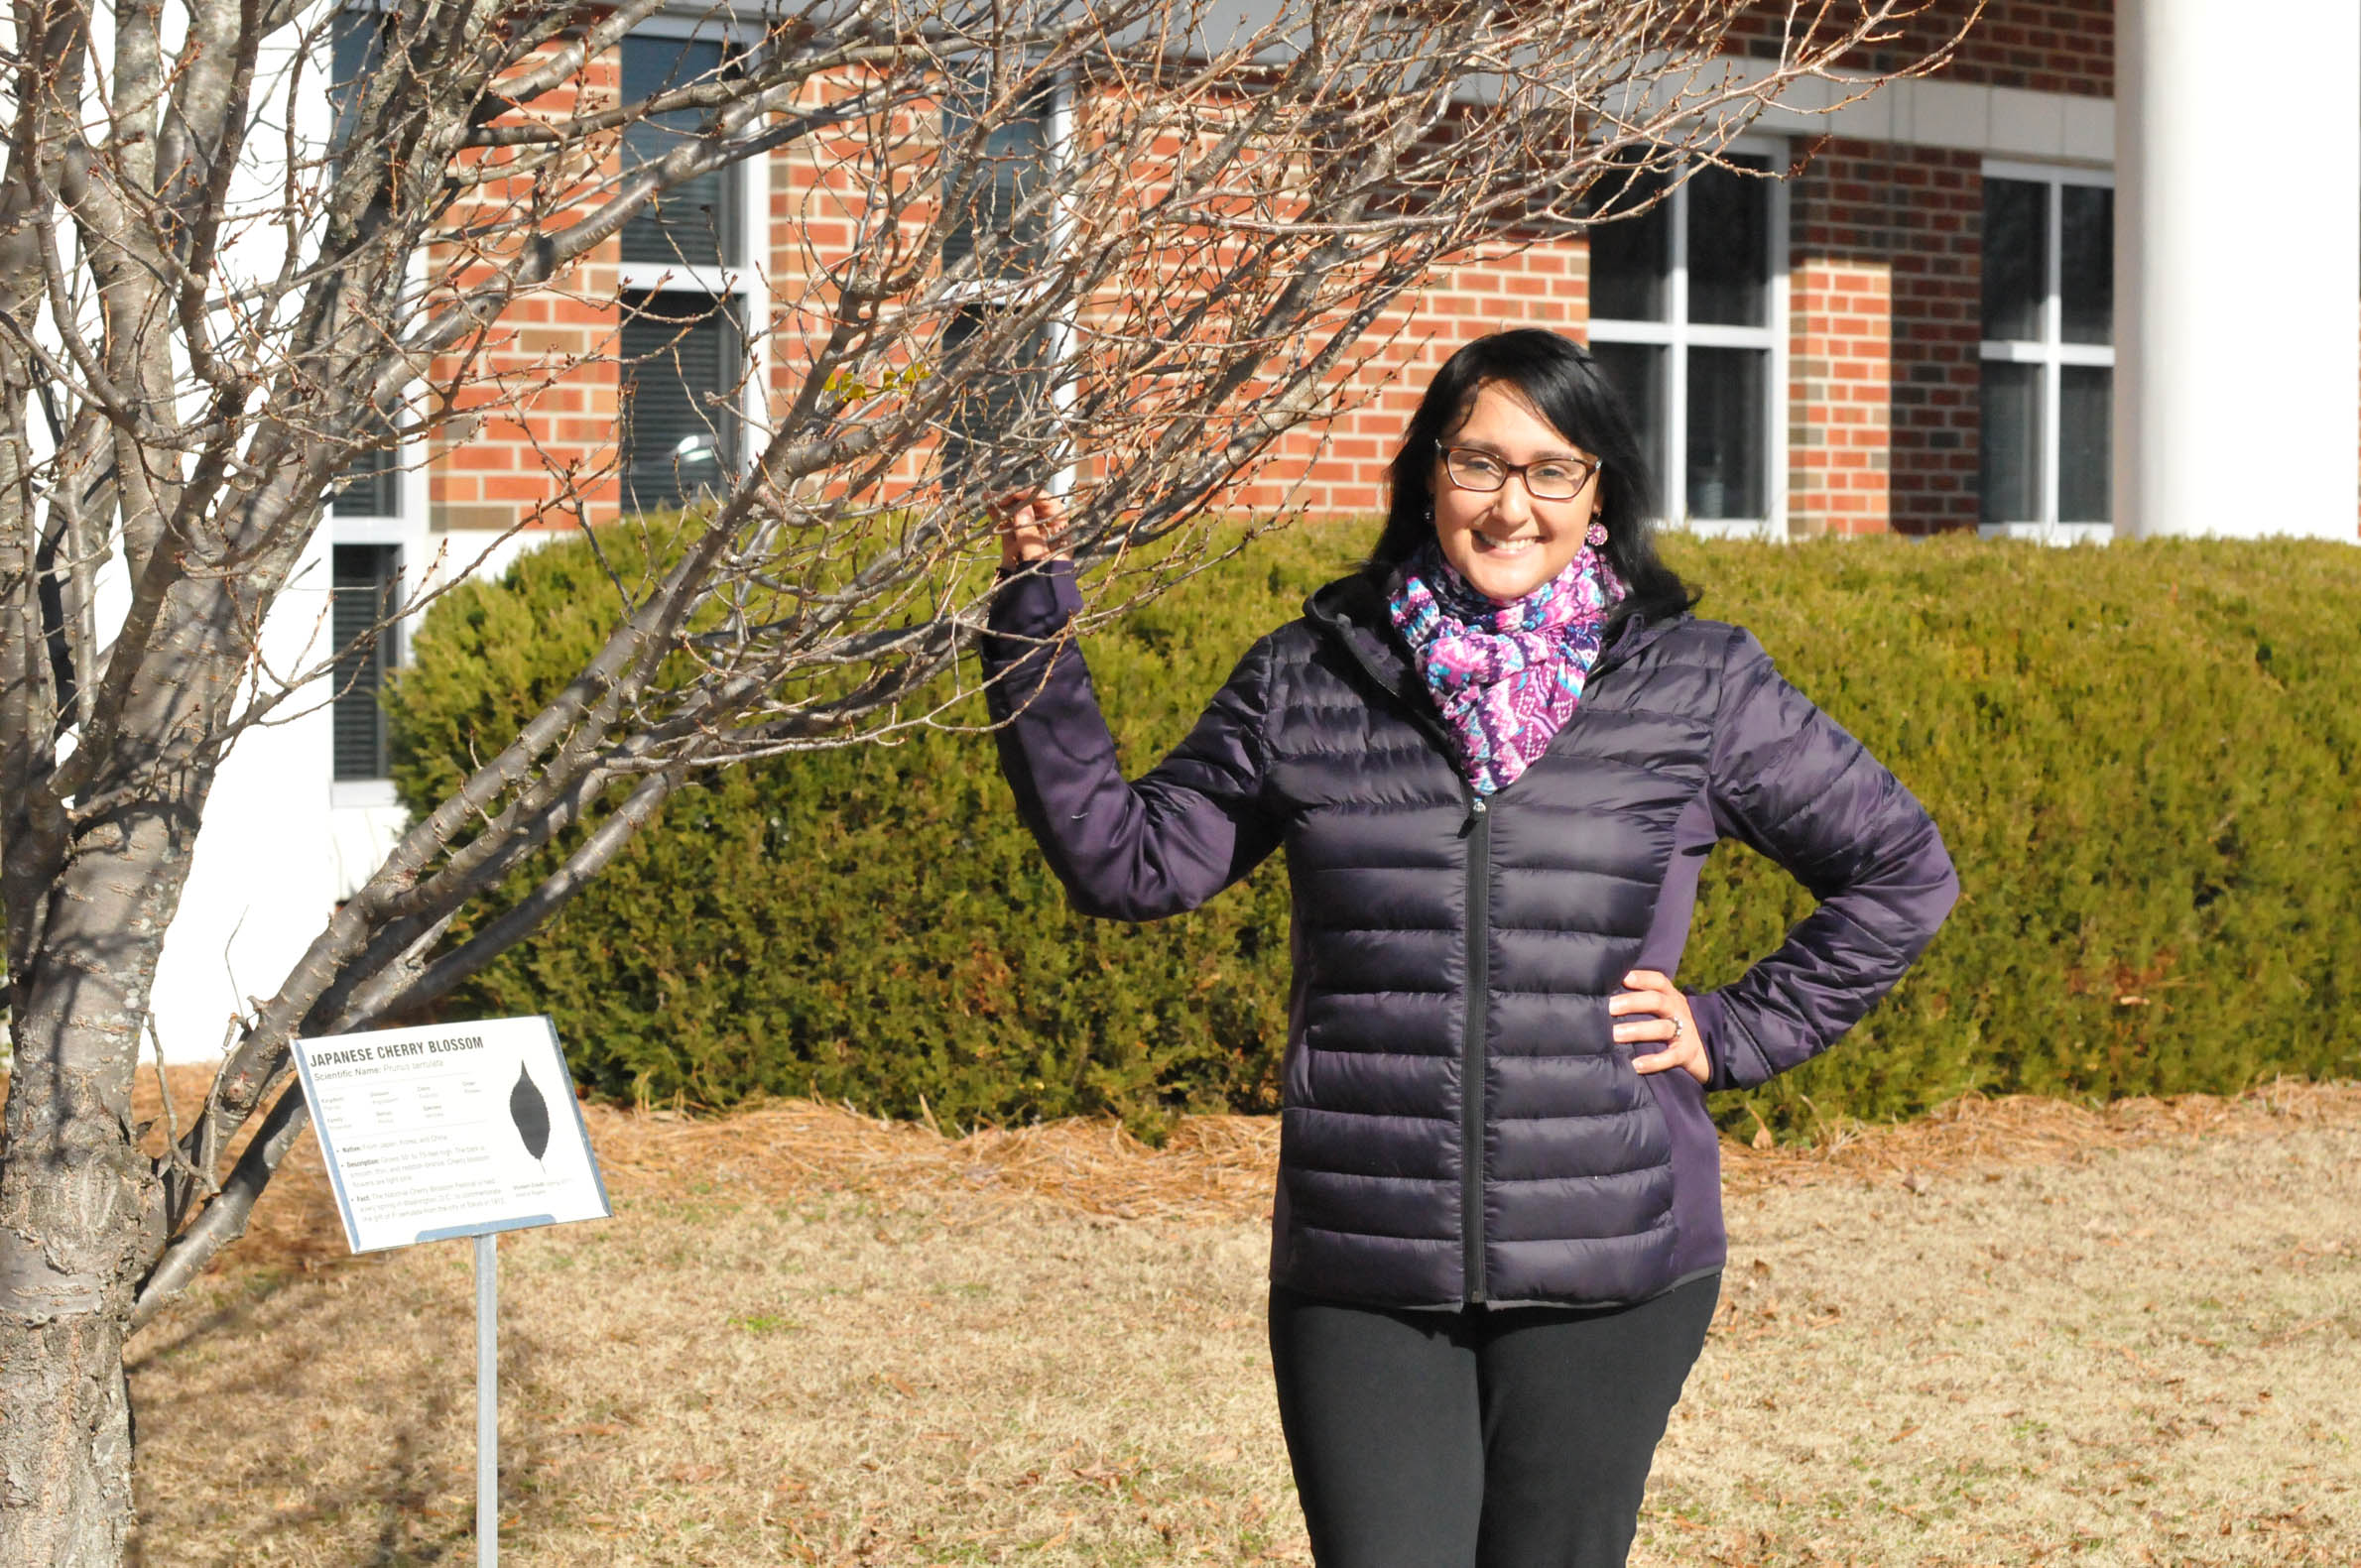 CCCC students participate in 'Tree Identification Project'